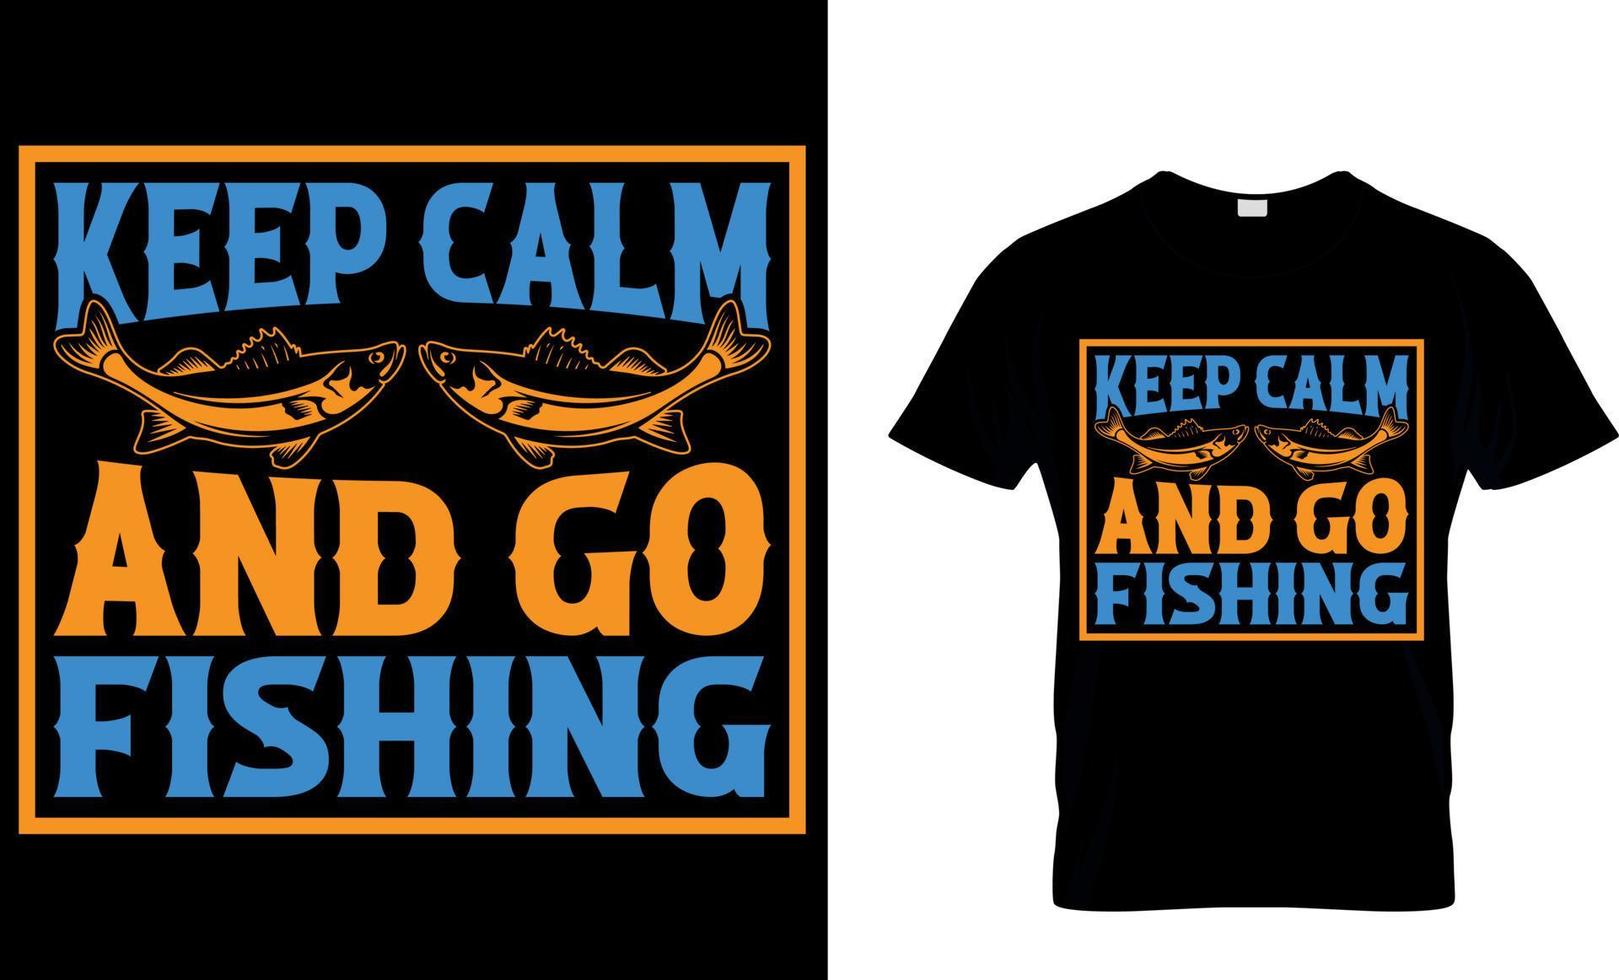 Keep calm and go fishing. fishing t-shirt design template. vector